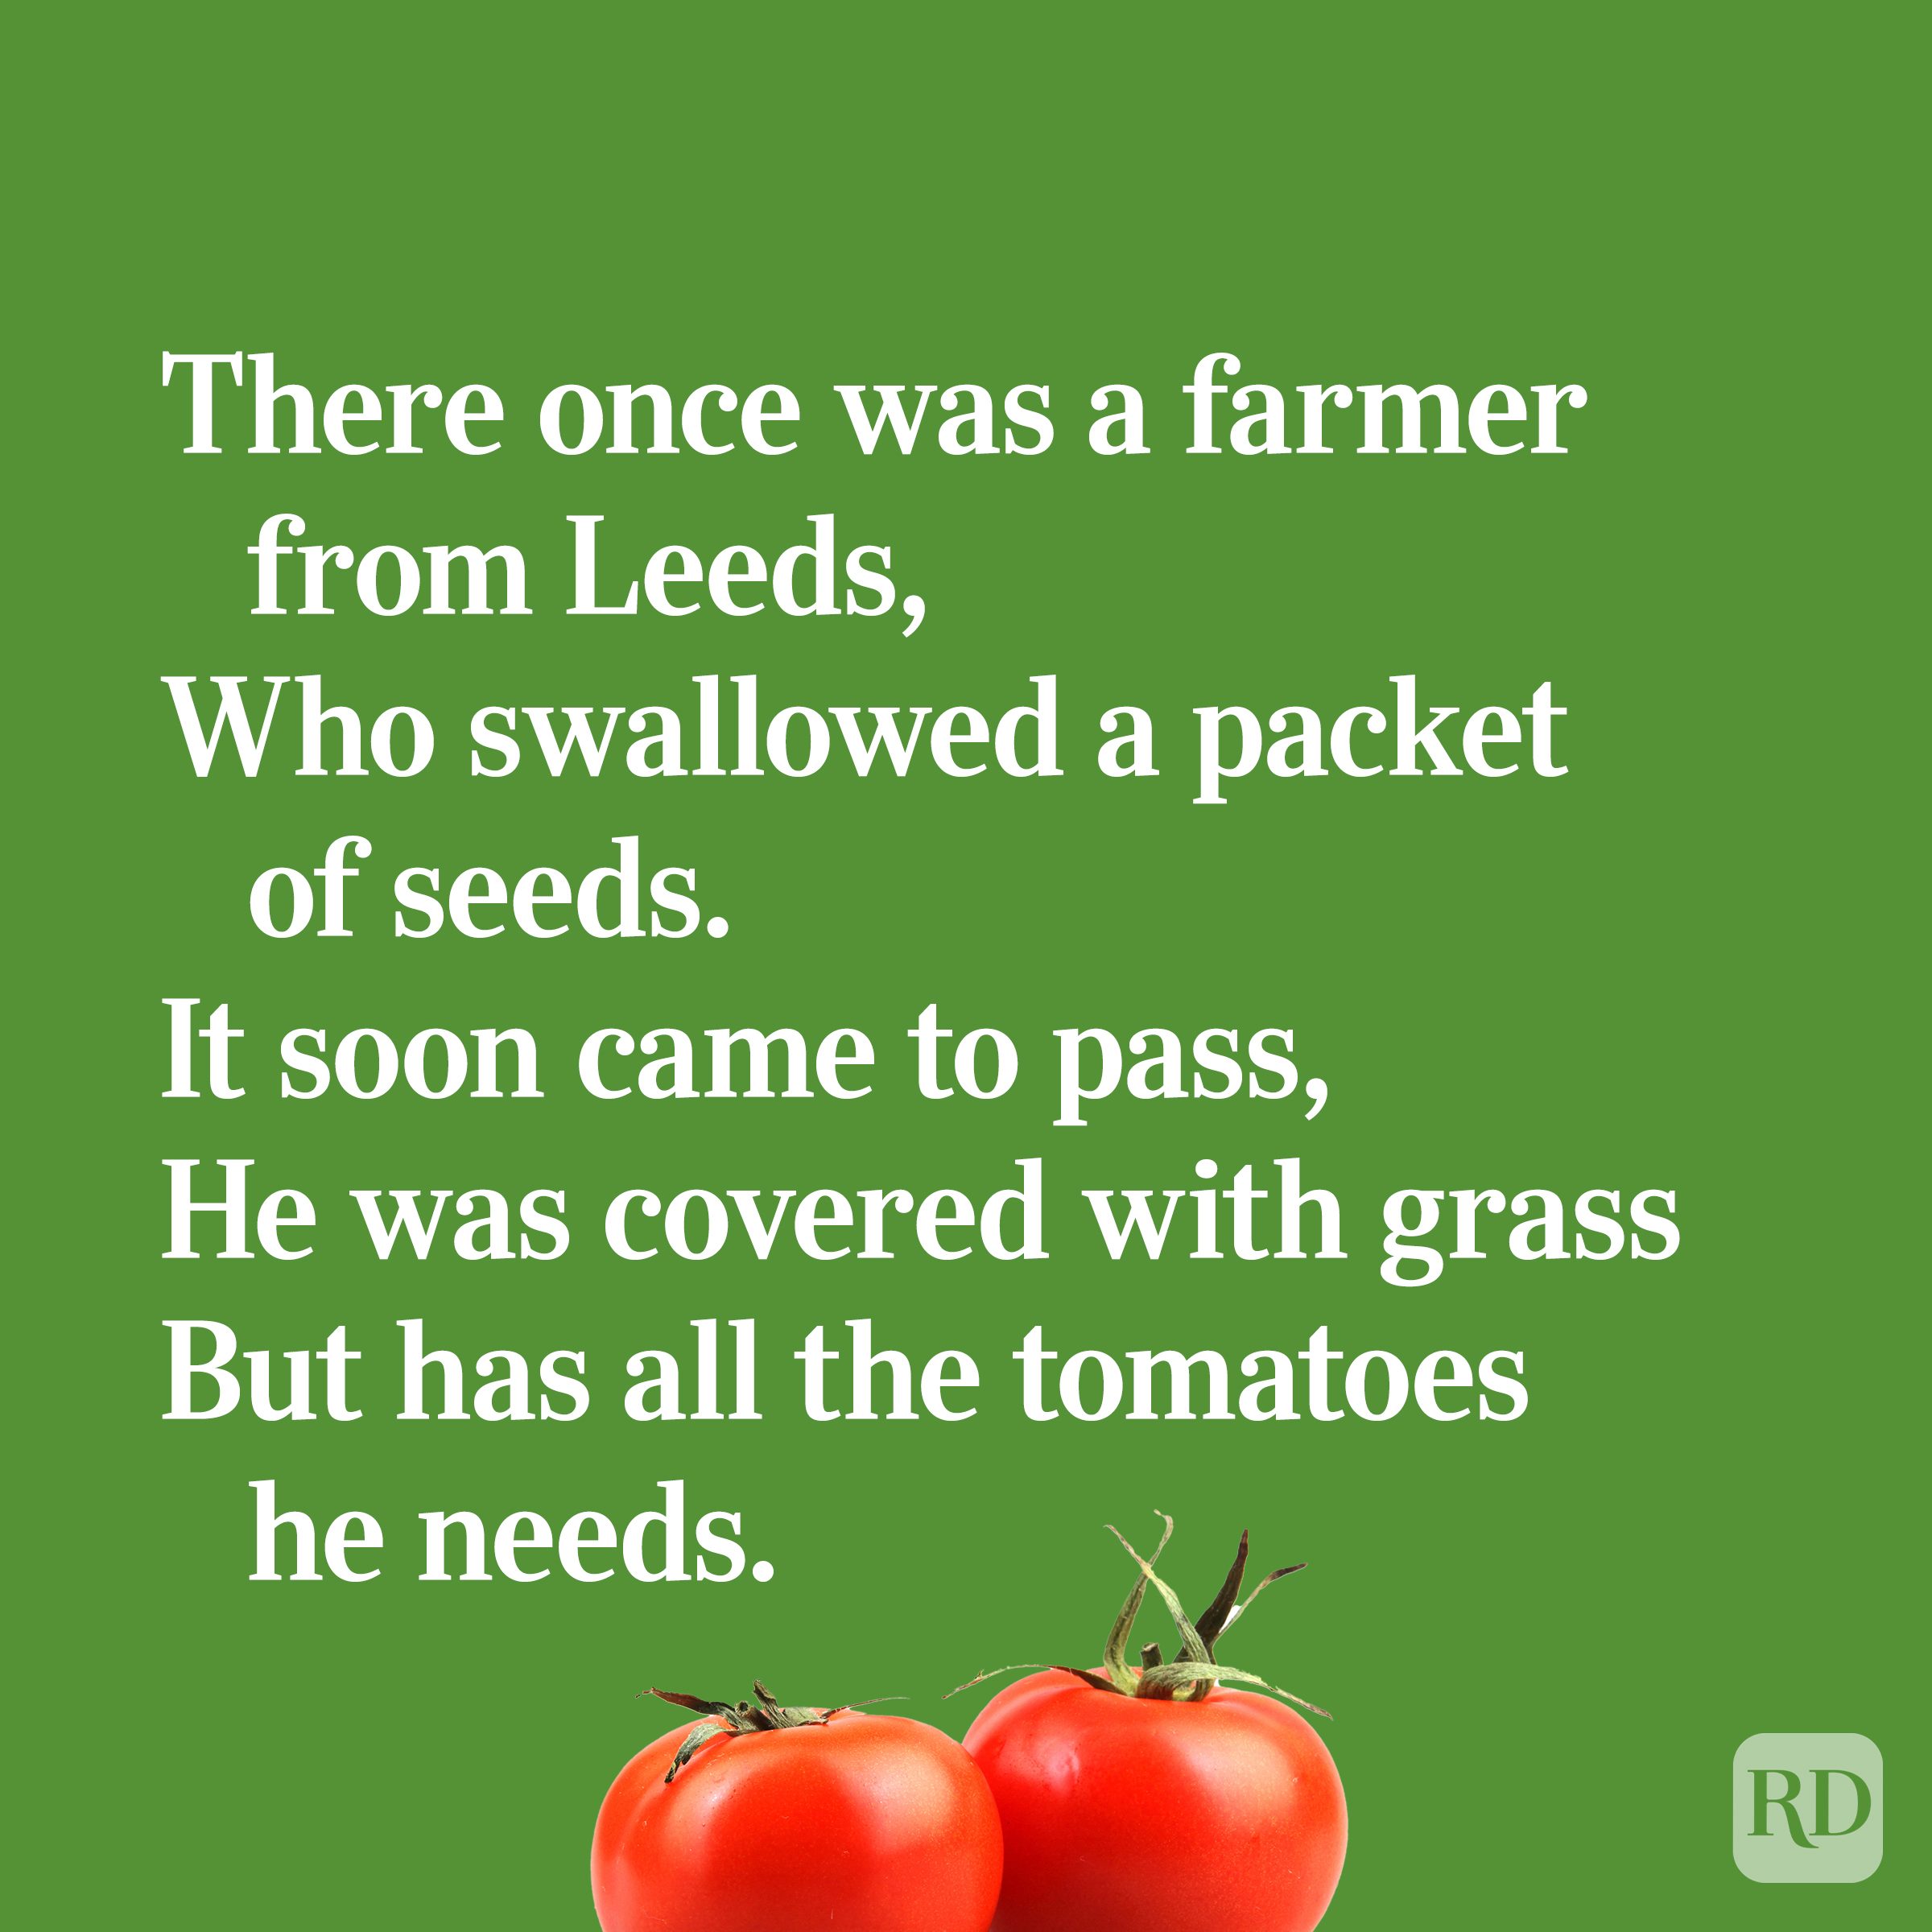 Quirky limerick about a farmer who swallowed tomato seeds